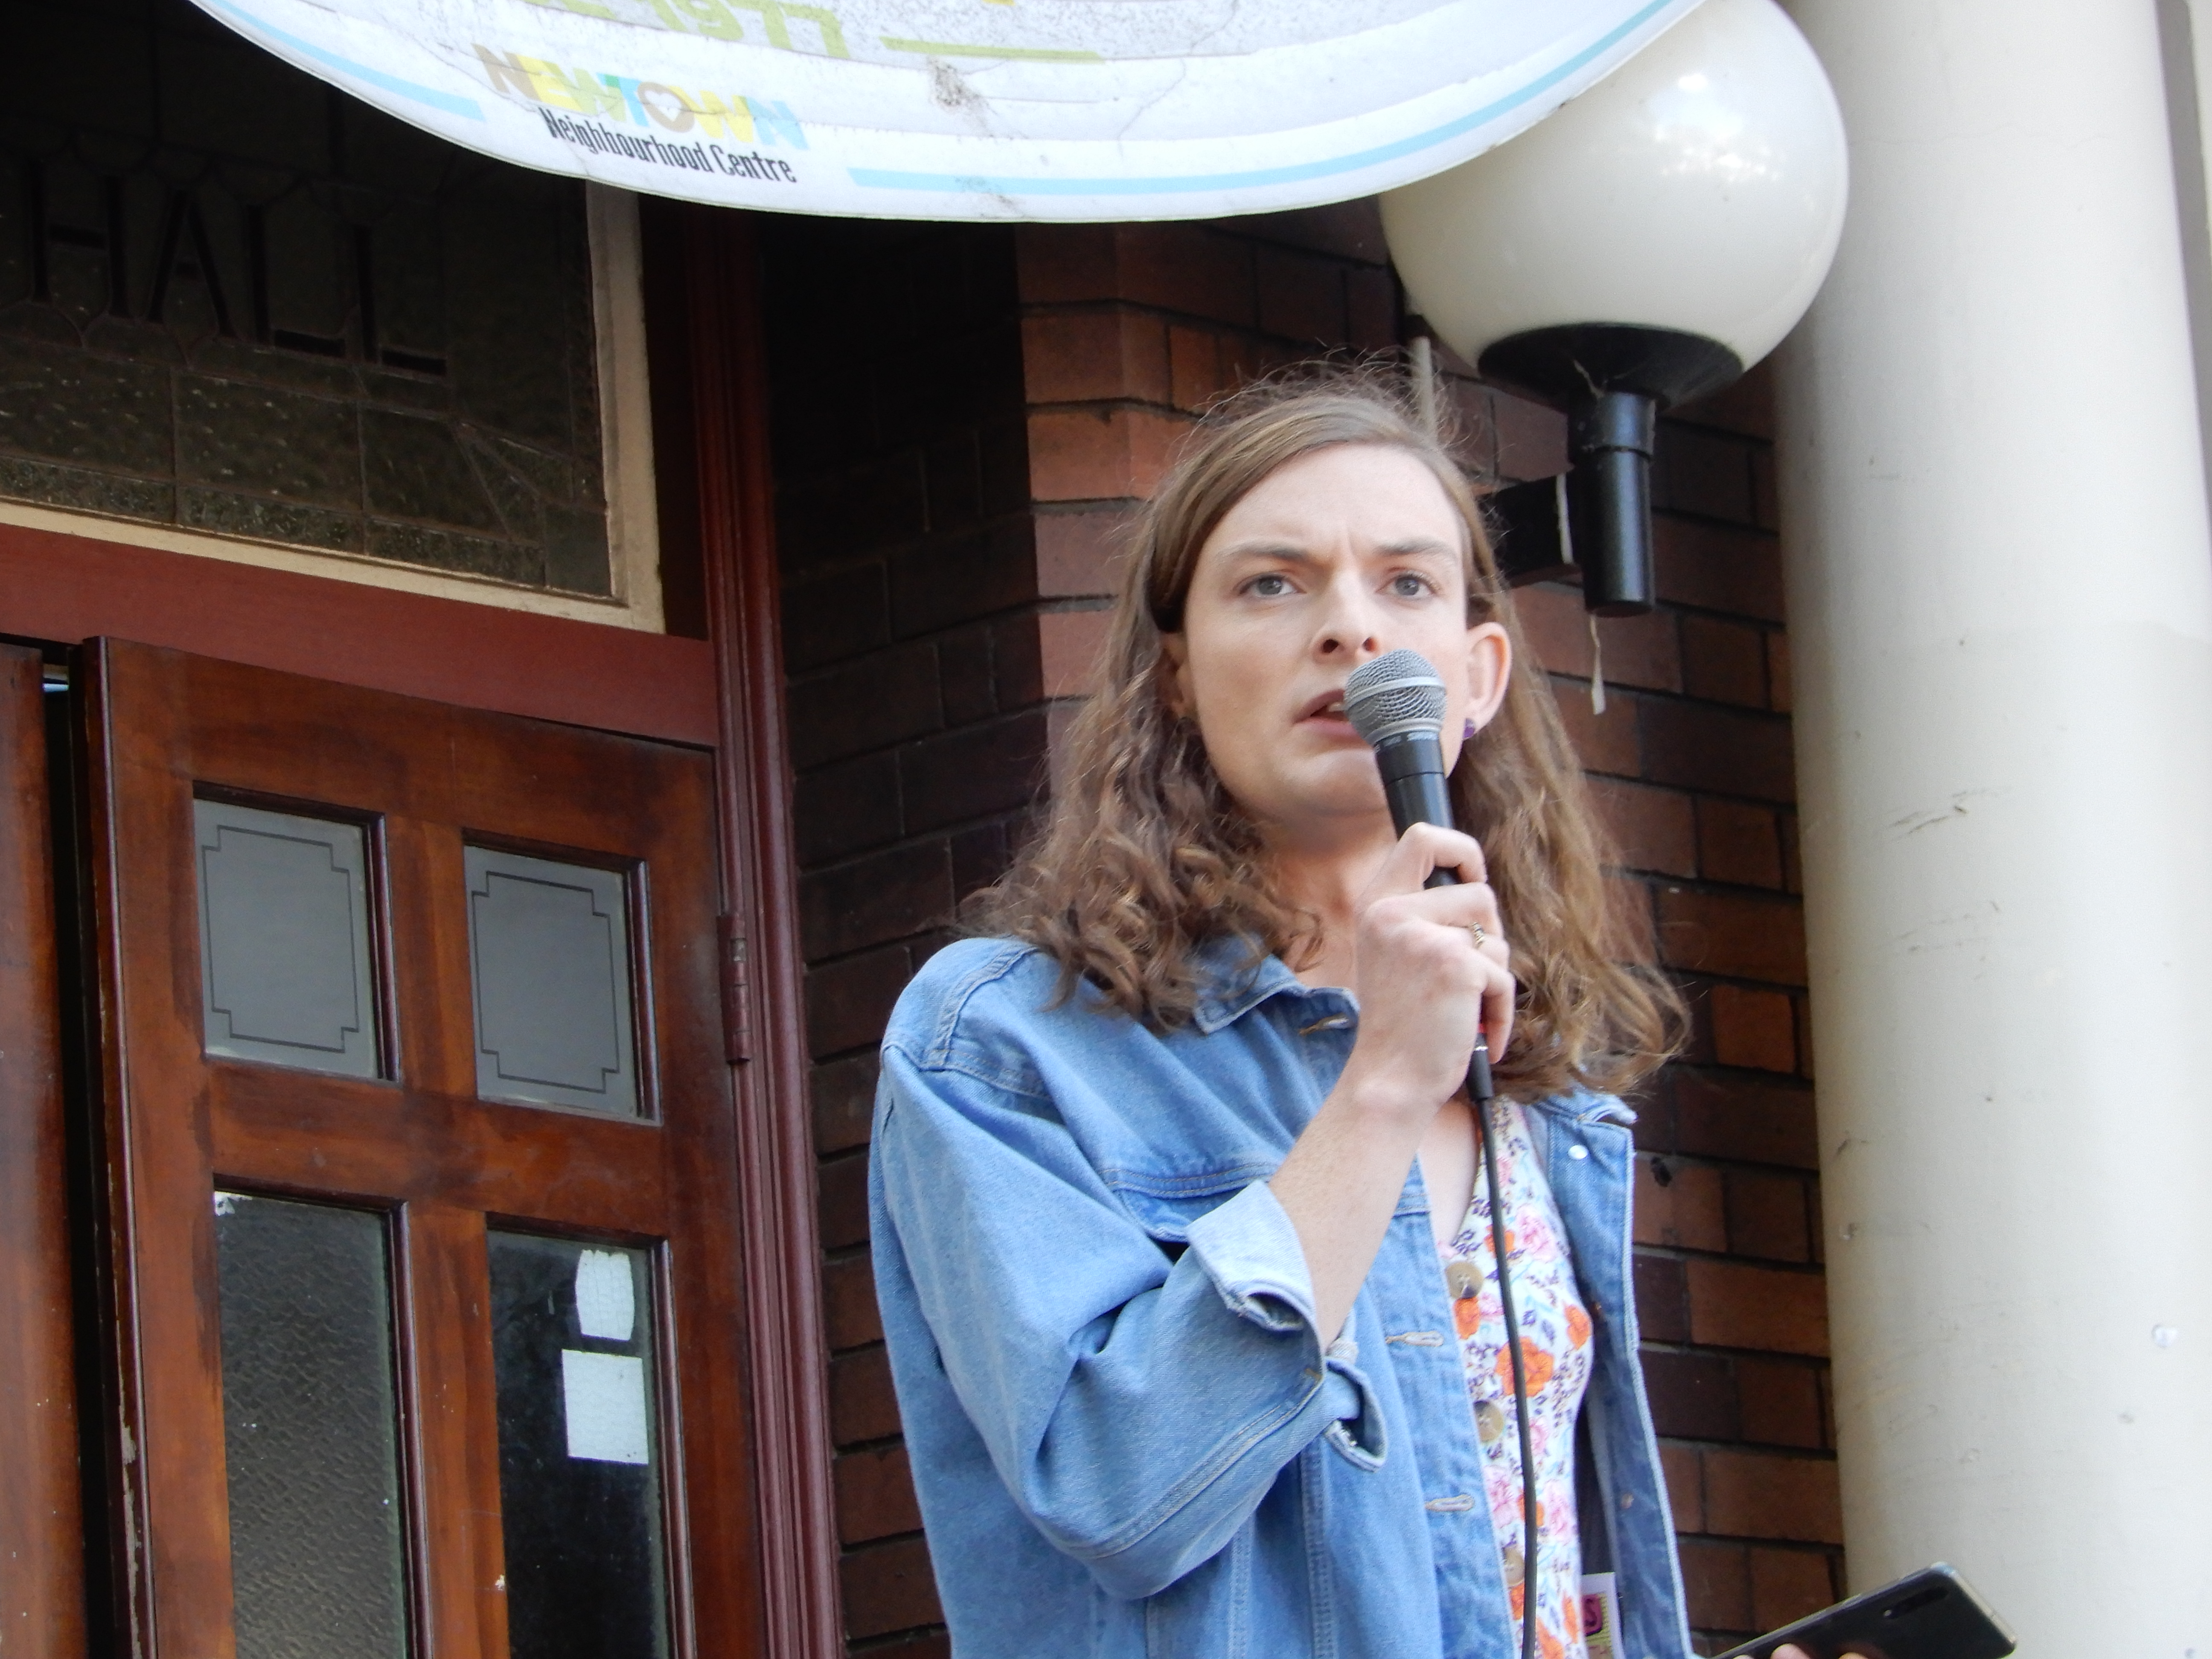 Community Action for Rainbow Rights spokesperson April Holcombe